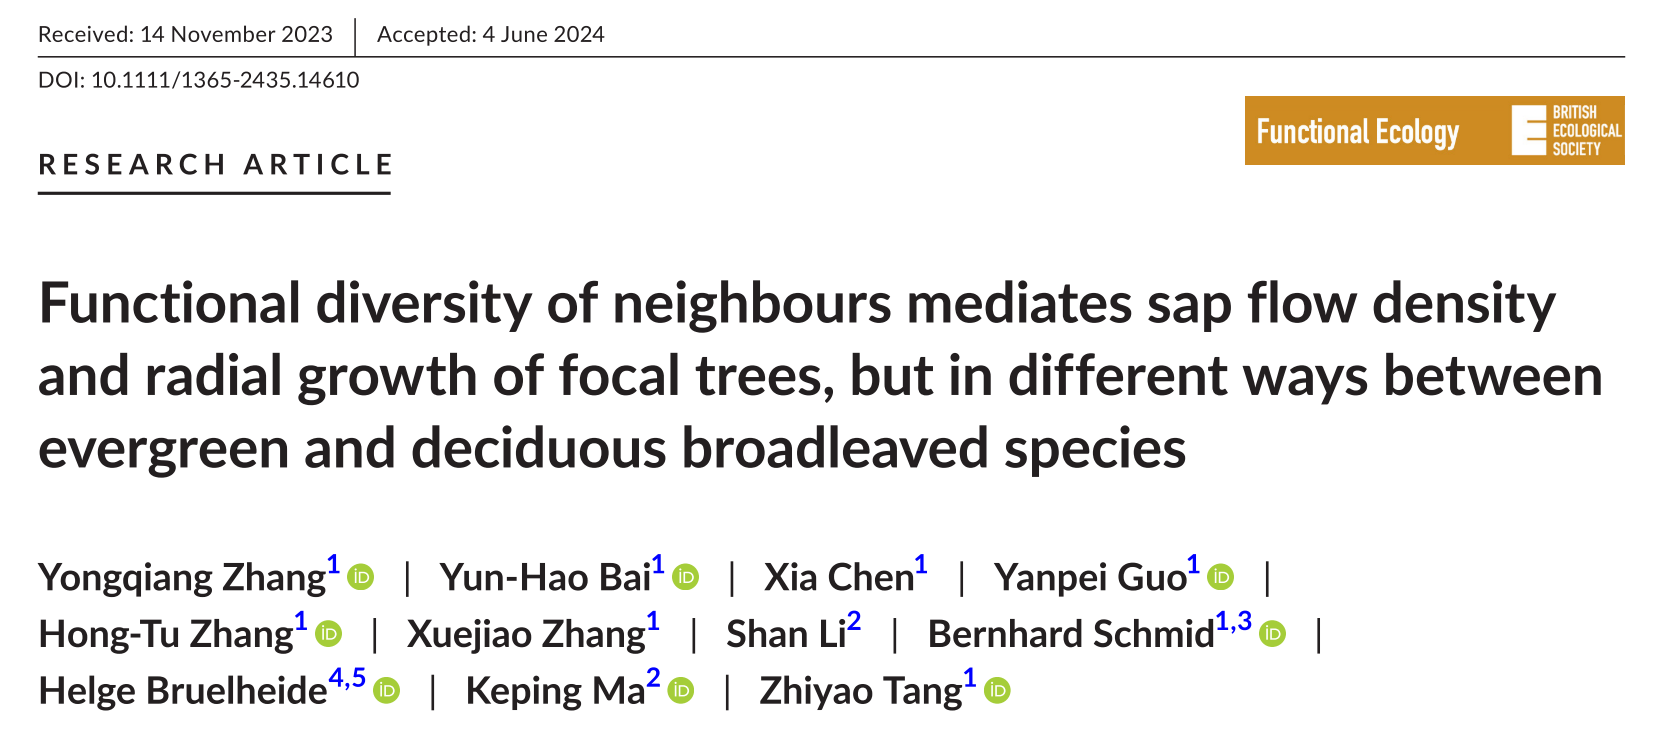 Functional diversity of neighbours mediates sap flow density and radial growth of focal trees, but in different ways between evergreen and deciduous broadleaved species